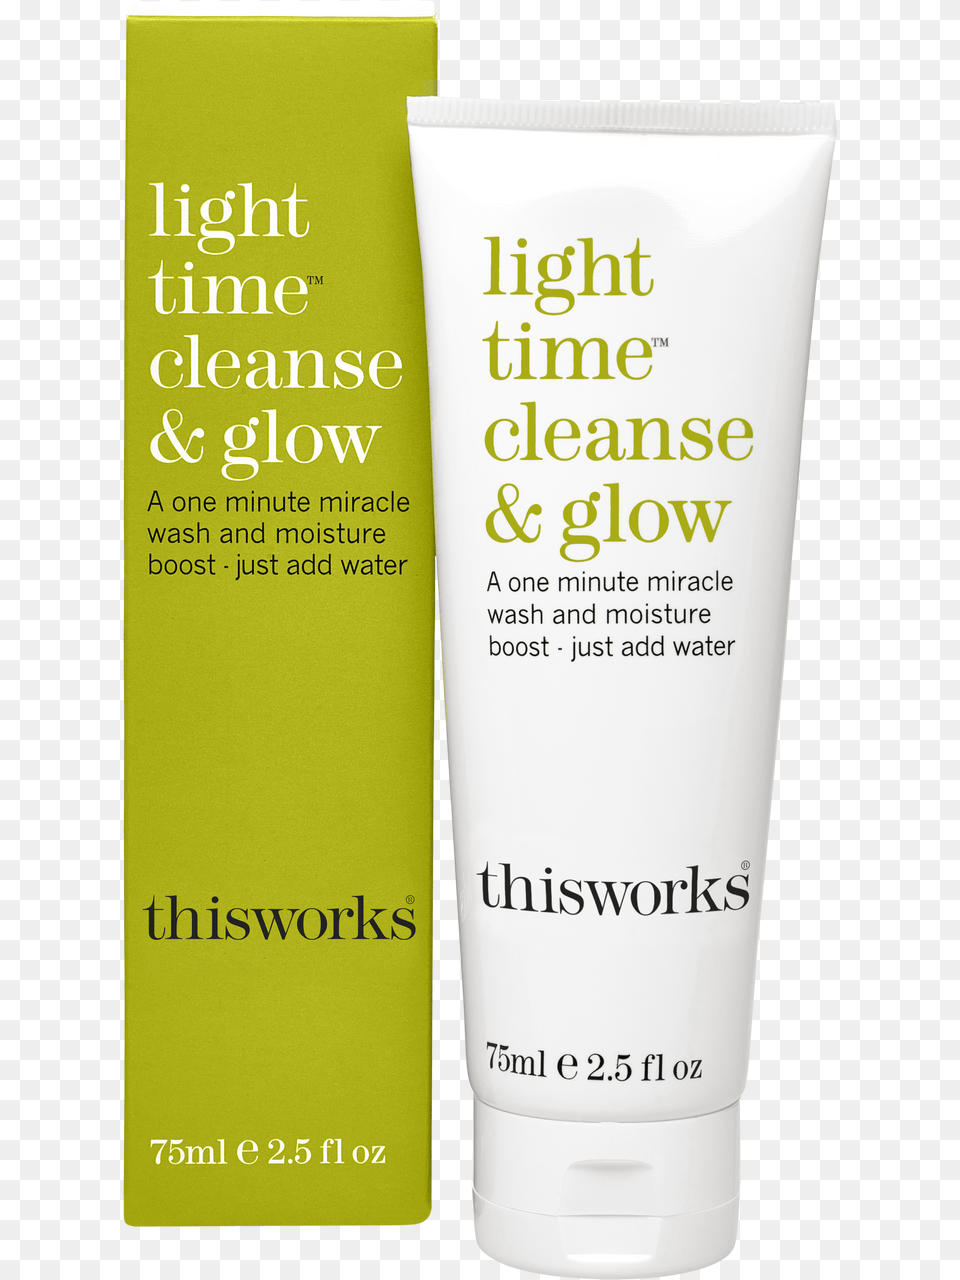 This Works Light Time Cleanse Amp Glow Cosmetics, Book, Bottle, Publication, Lotion Free Transparent Png